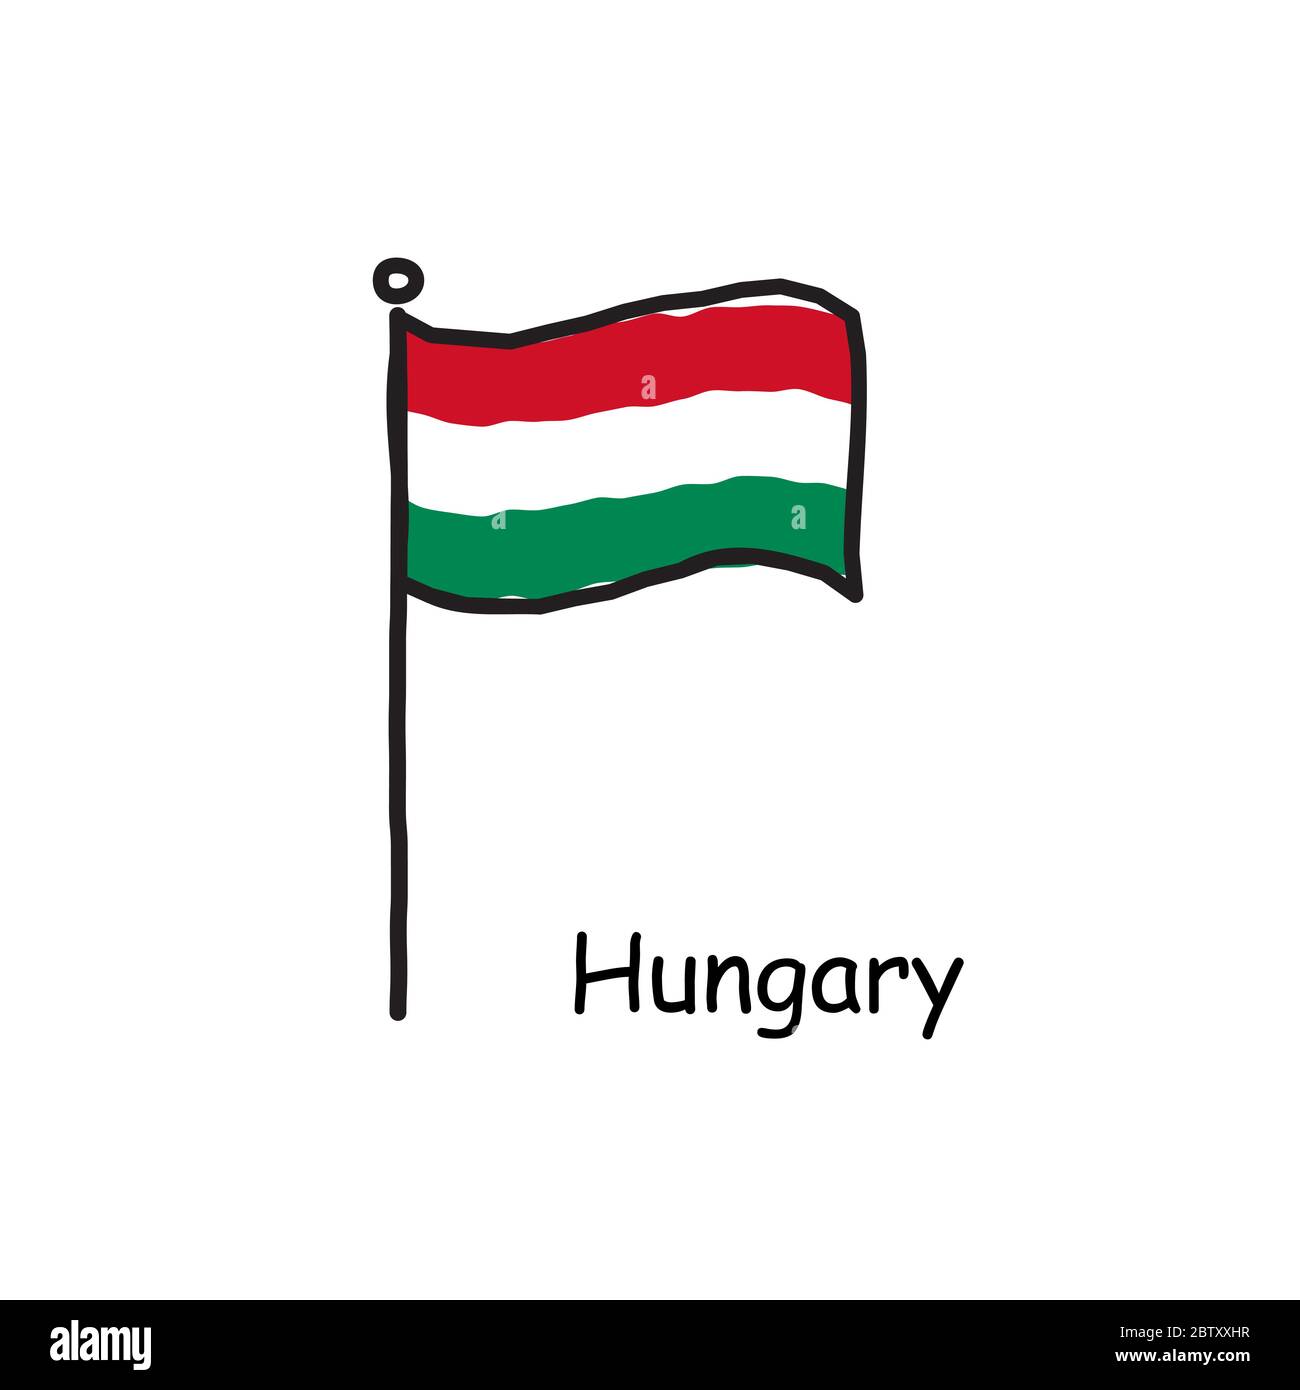 hand drawn sketchy Hungary flag on the flag pole. three color flag . Stock Vector illustration isolated on white background. Stock Vector